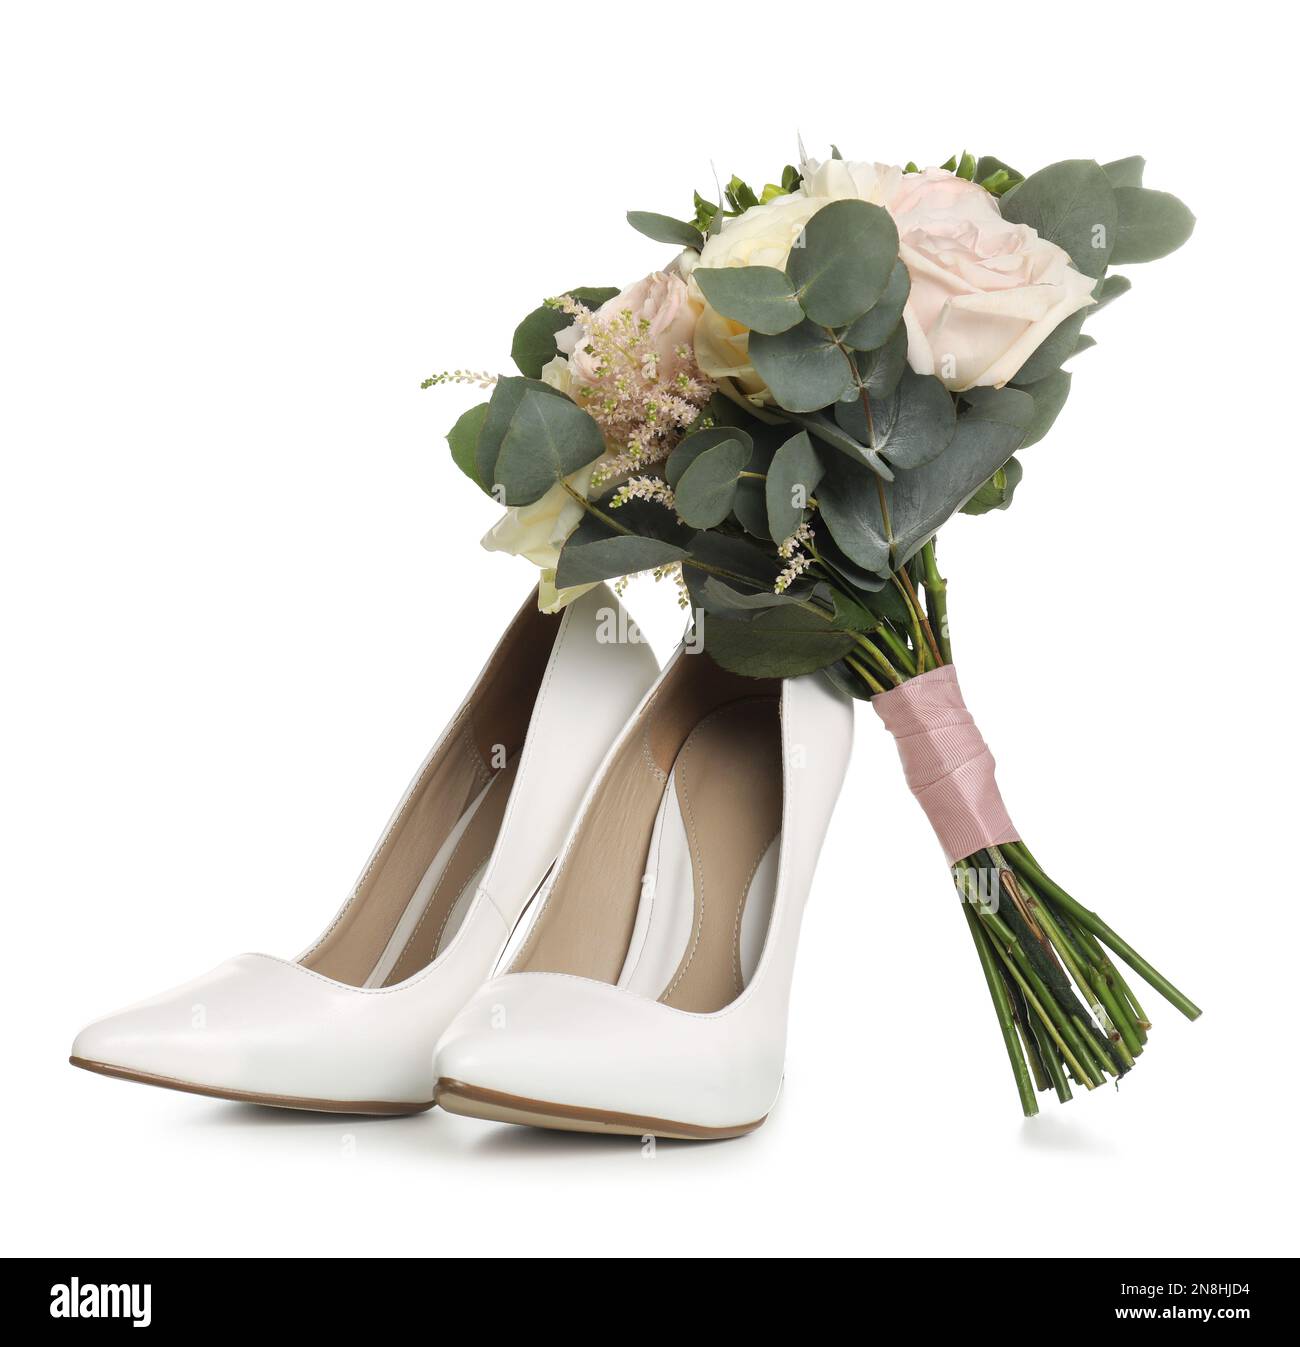 Pair of wedding high heel shoes and beautiful bouquet on white background Stock Photo